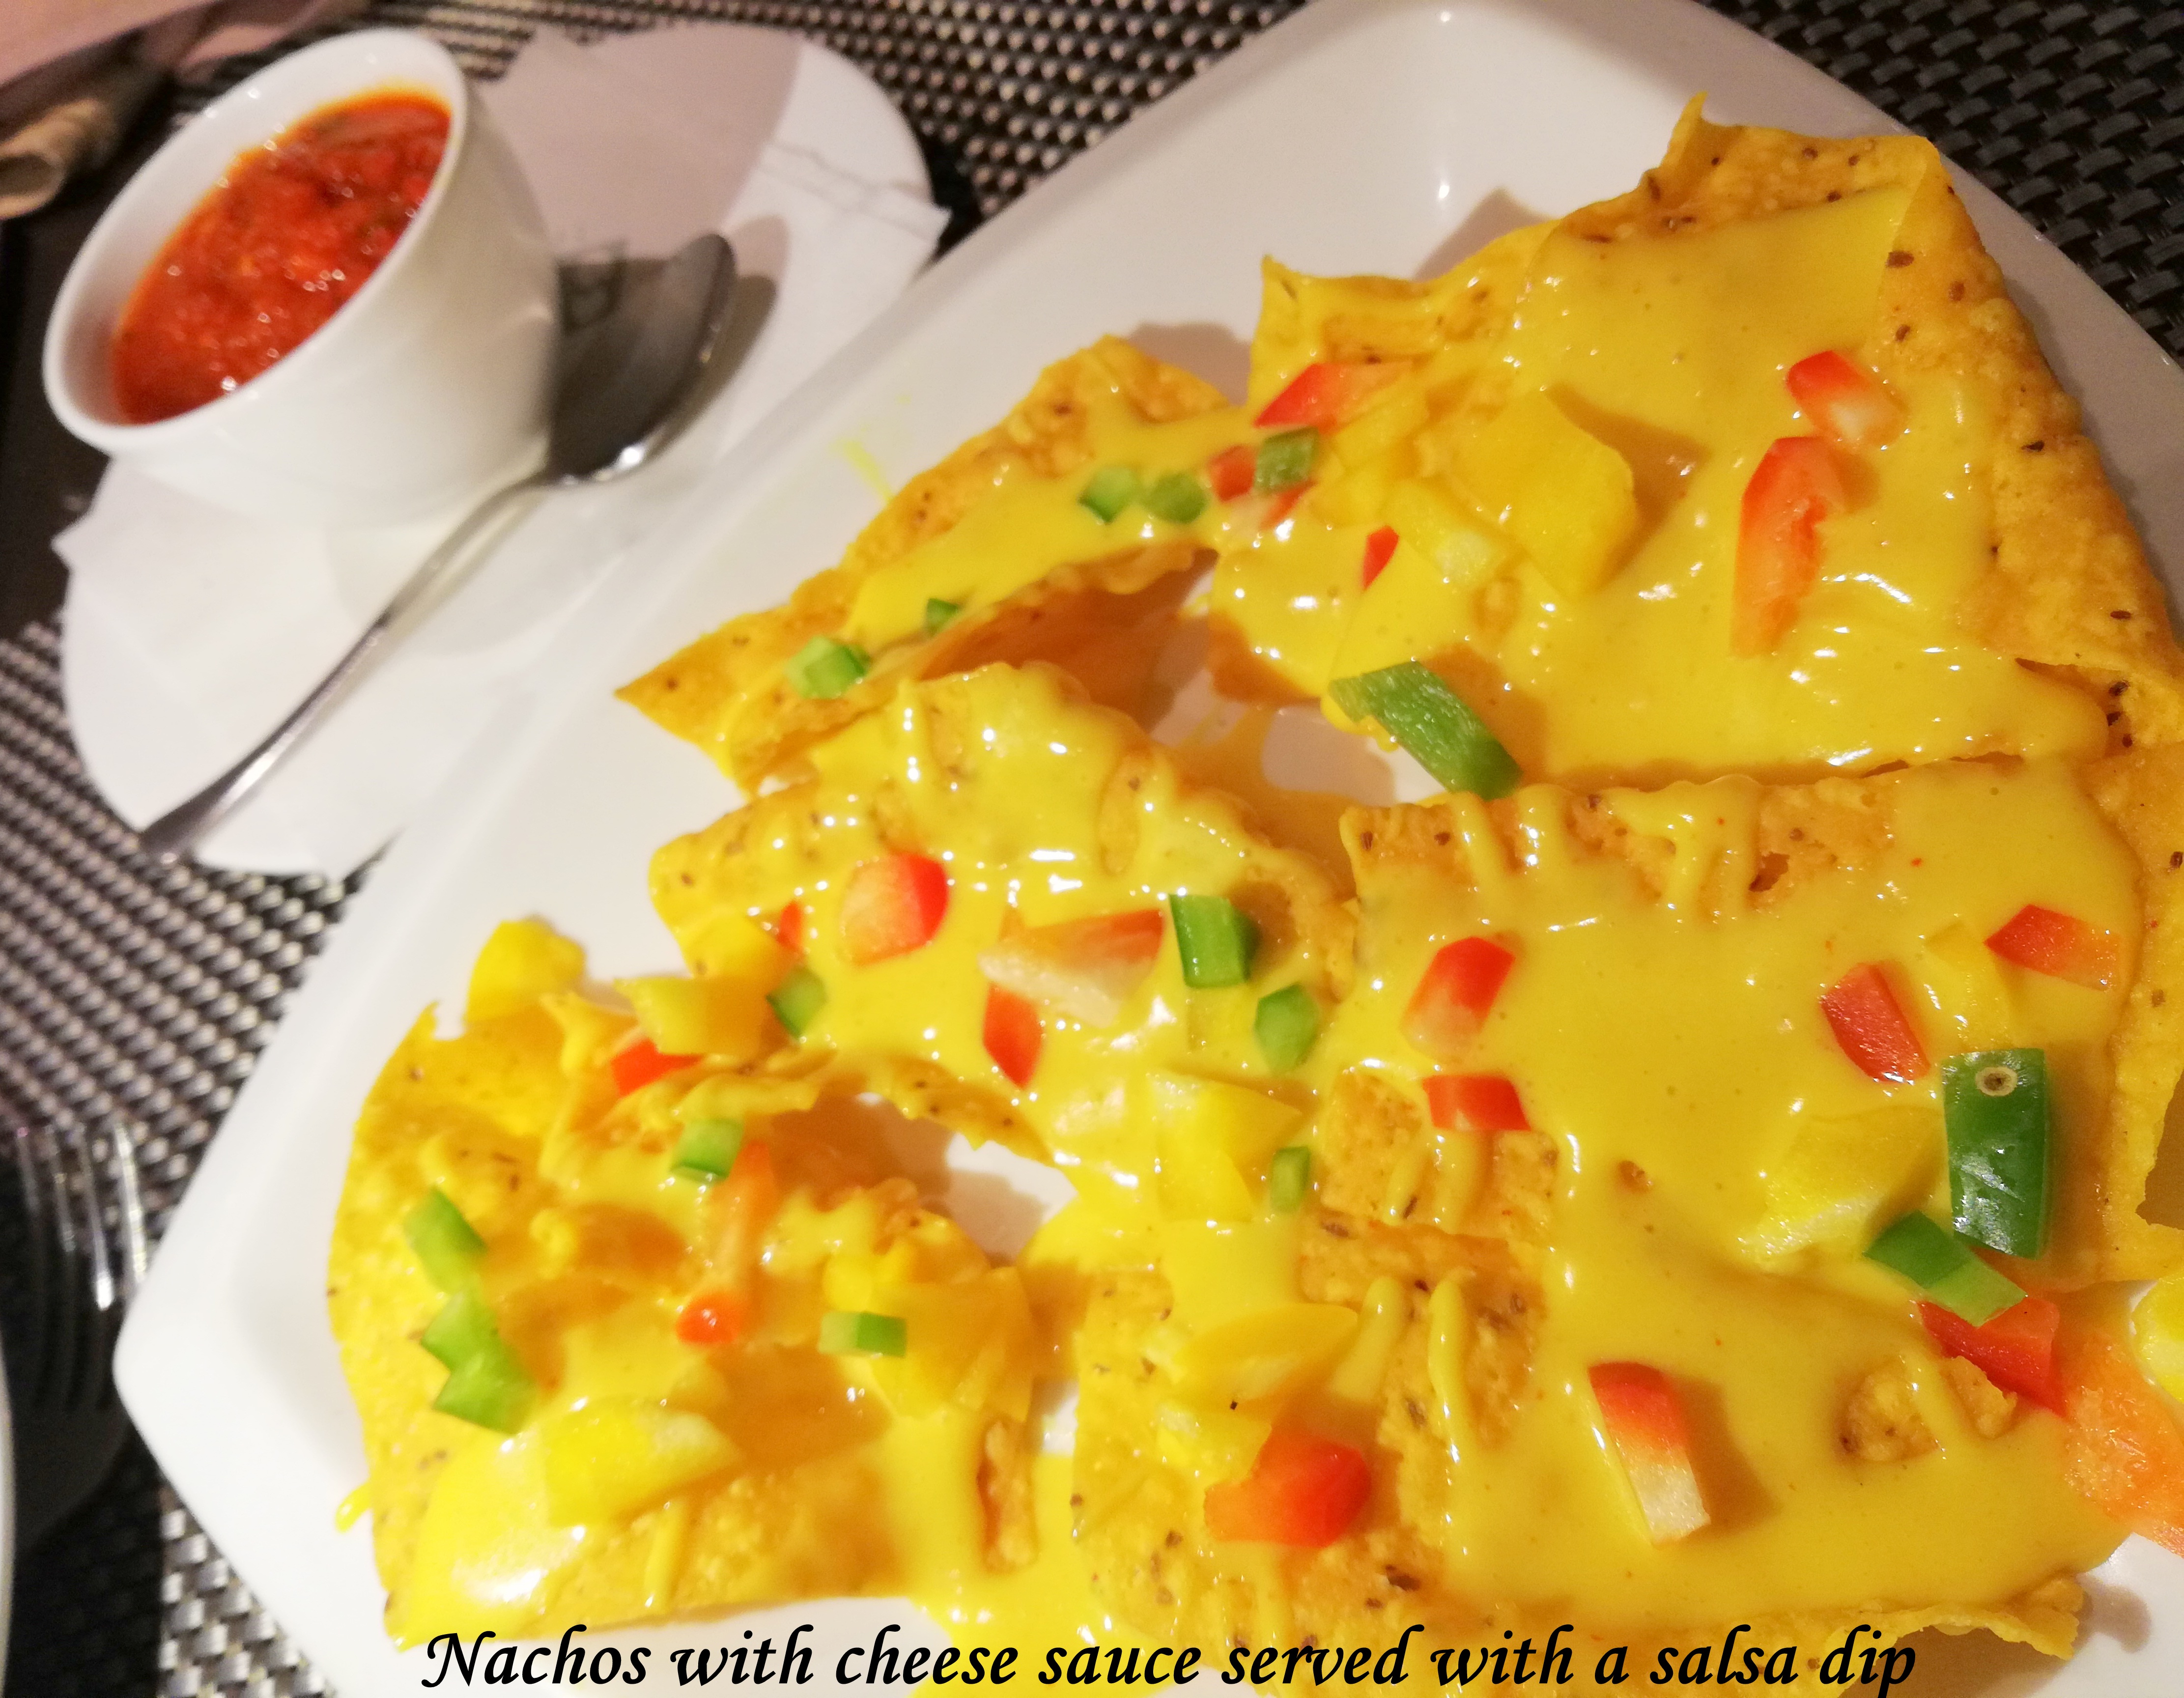 Nachos with cheese sauce - Little Italy